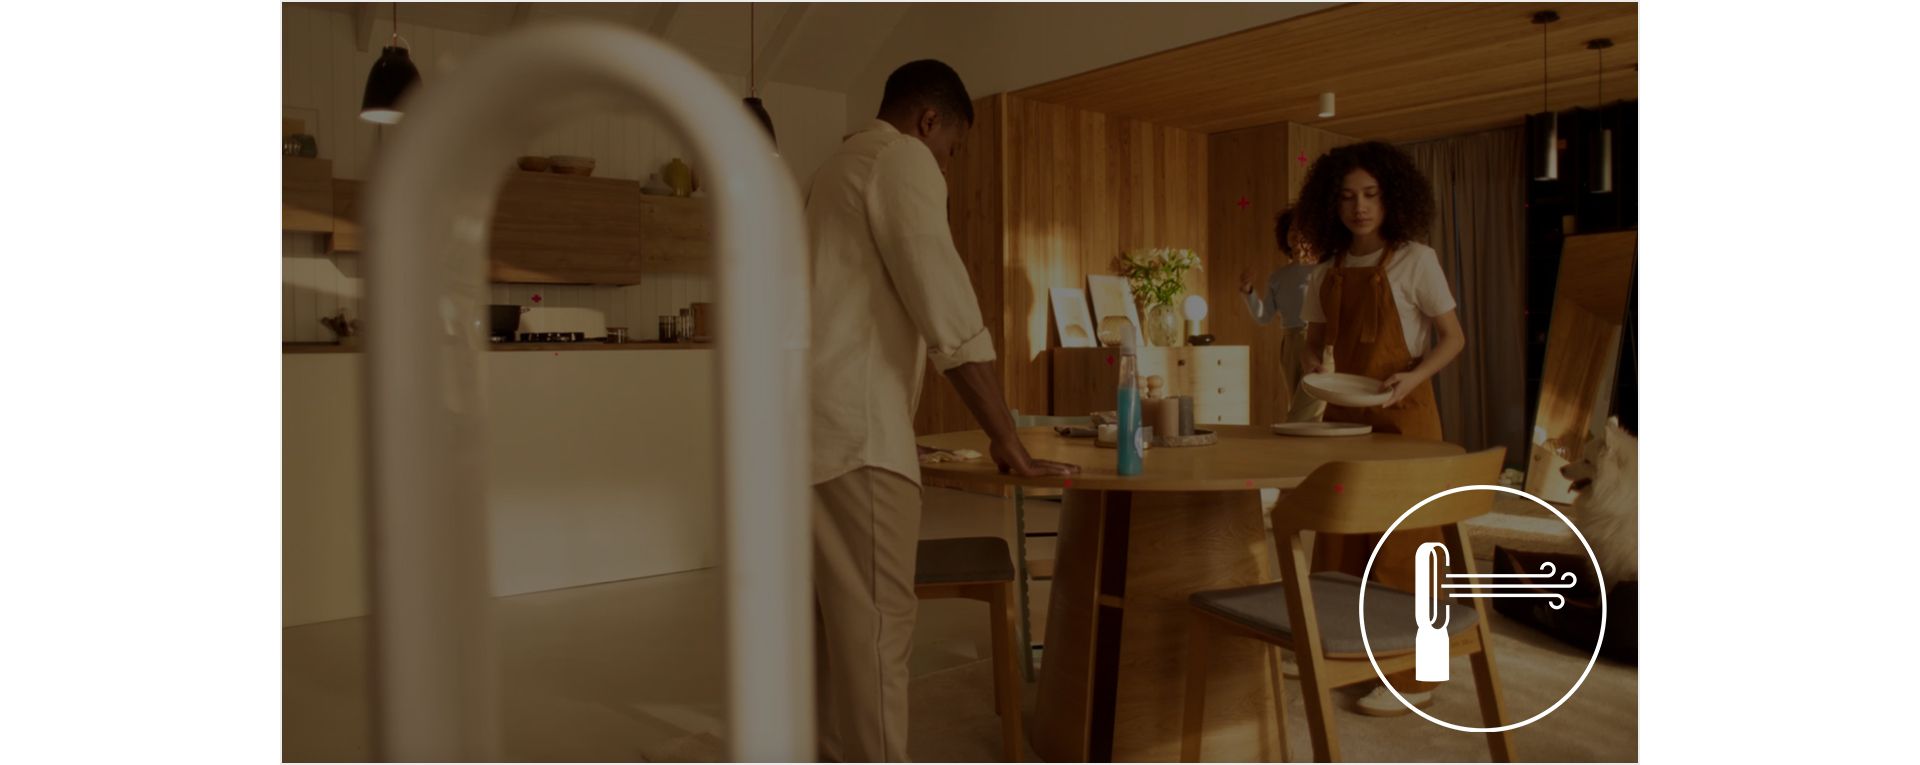 A man and woman setting the table in an open plan kitchen and dining area